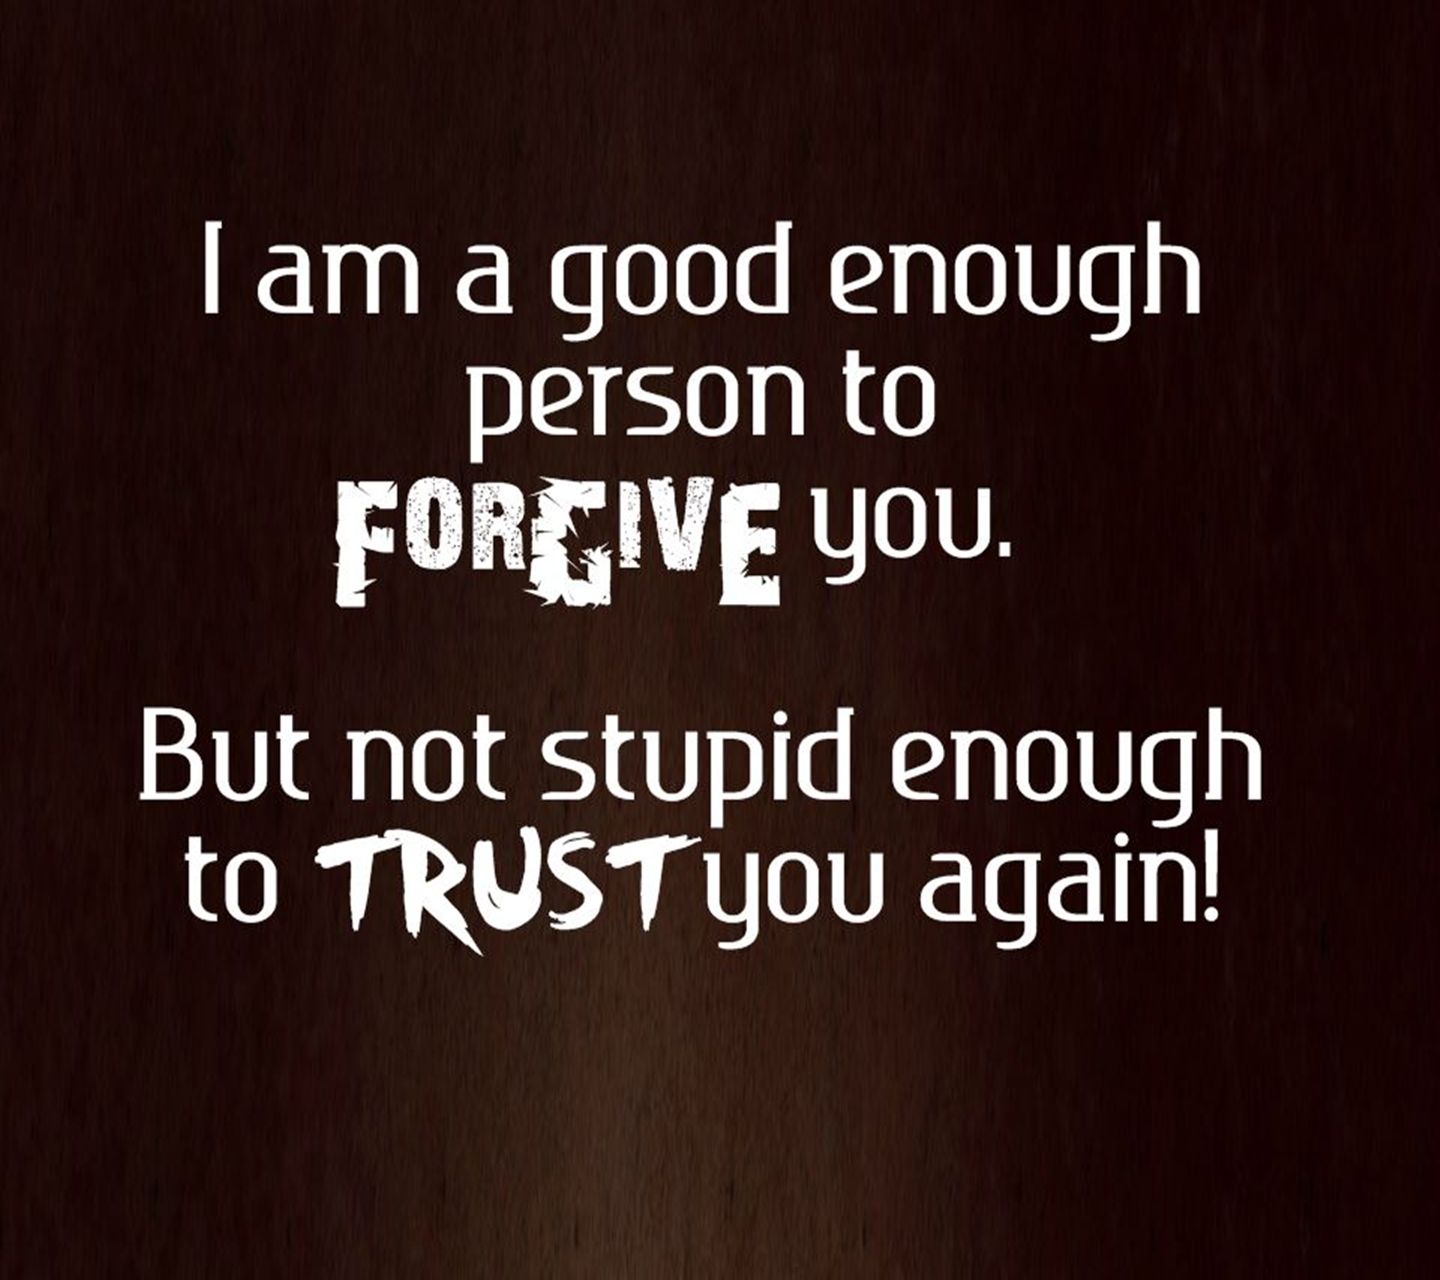 Inspirational Wallpaper Not Stupid To Trust Again Quotes